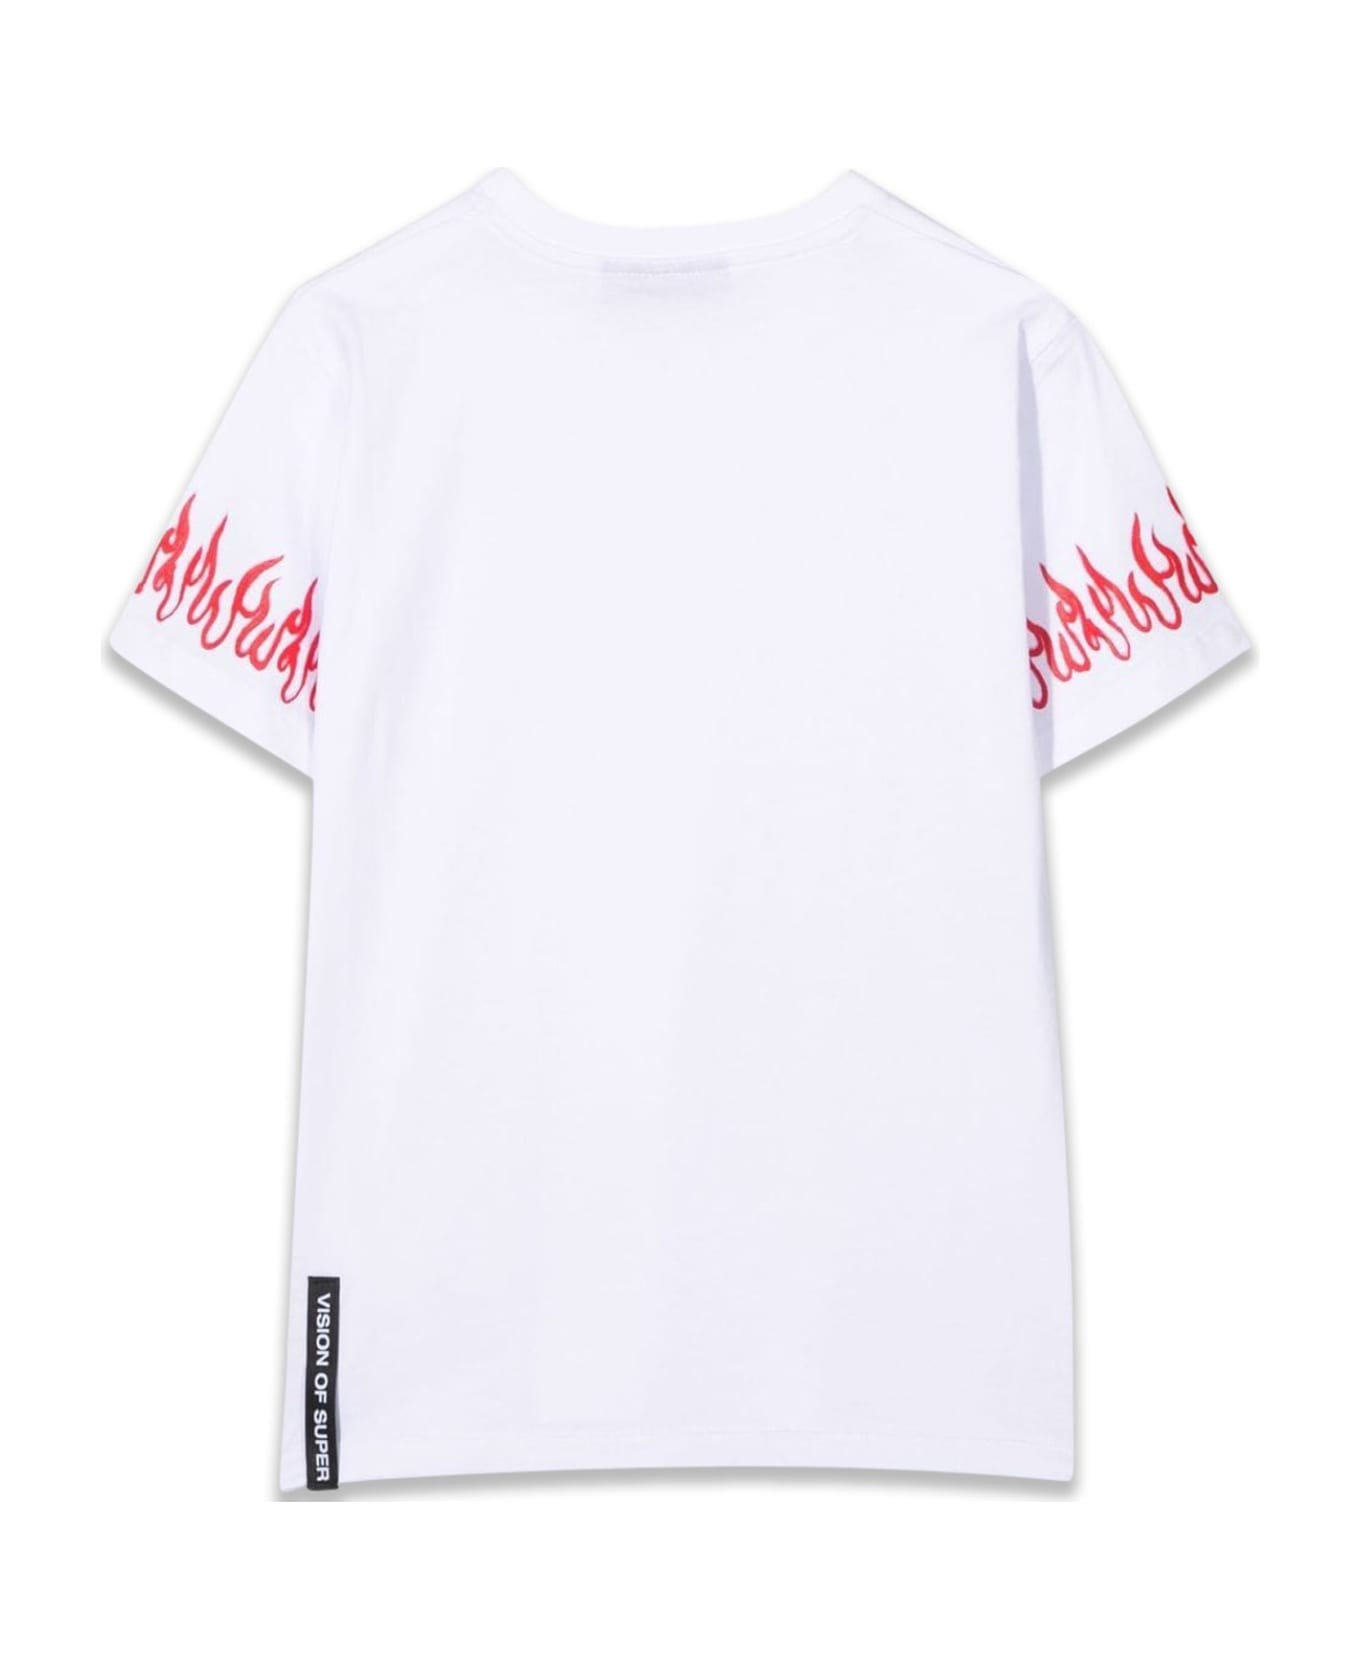 Vision of Super T-shirt With Red Spray Flames - BIANCO